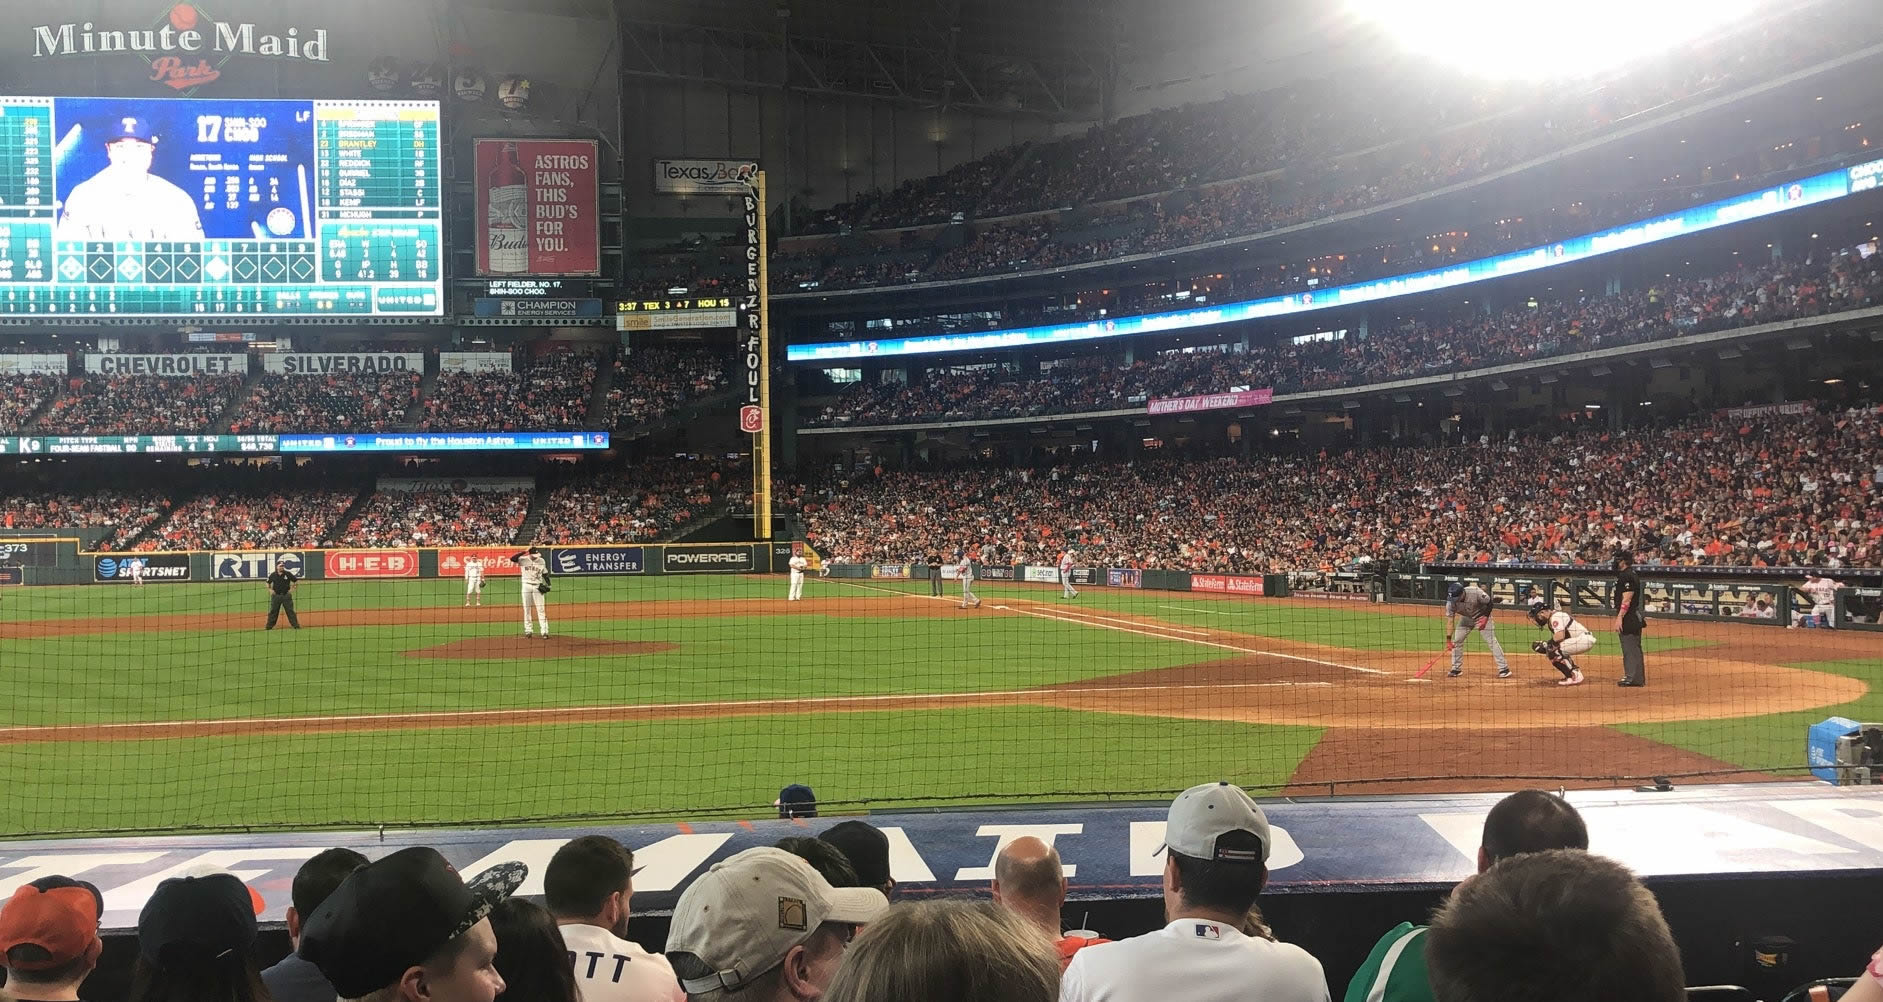 section 114, row 10 seat view  for baseball - minute maid park